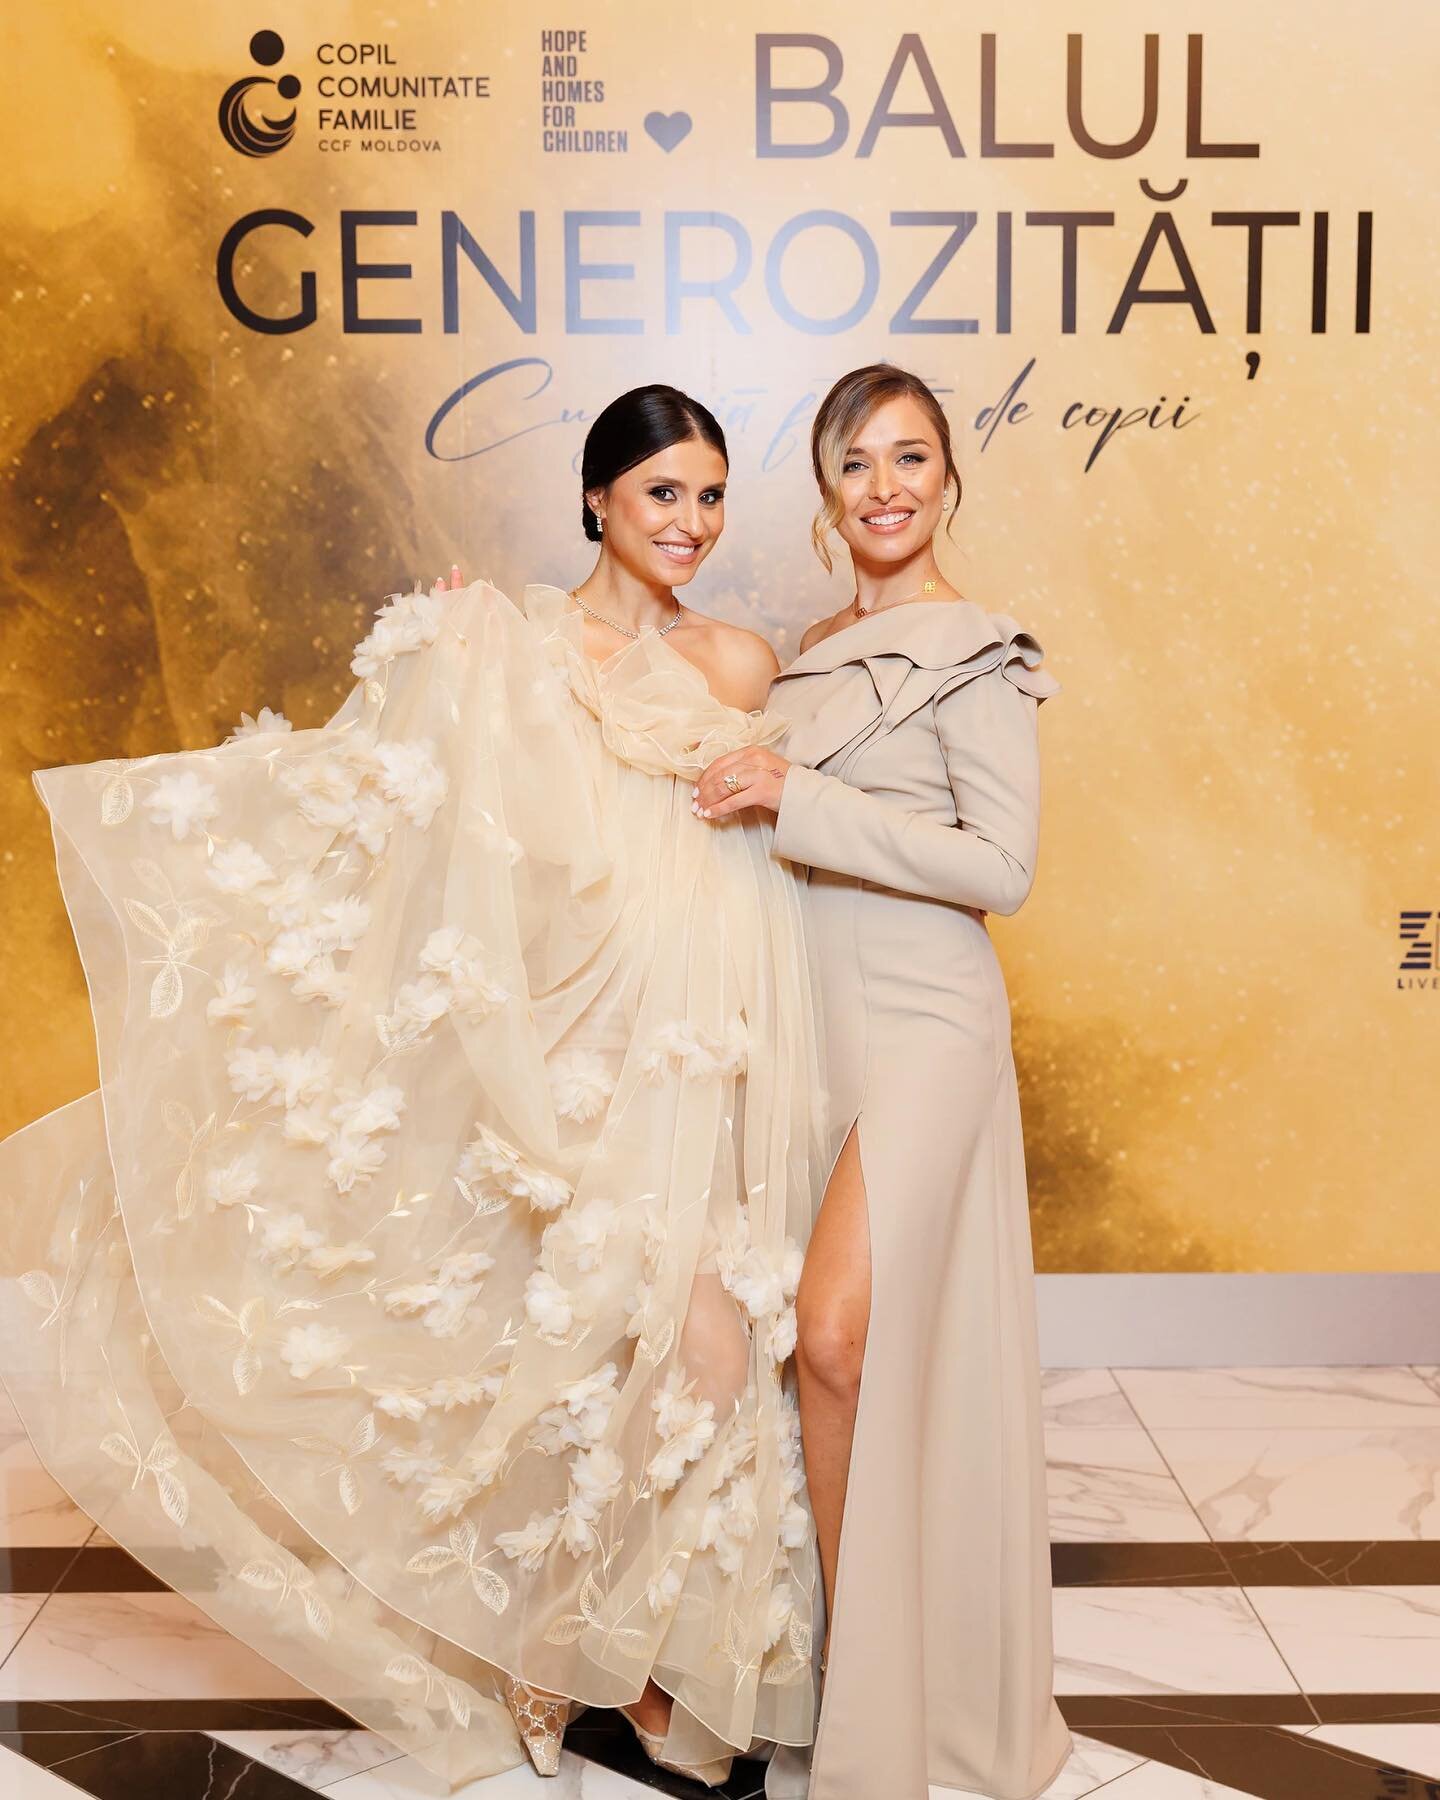 &ldquo;This Year&rsquo;s edition of the Generosity Ball helped us raise 71,241 euros, money that will help us contribute to the inclusion of children with special needs in their community schools.
Last night we presented our patron, Valentina Naforni